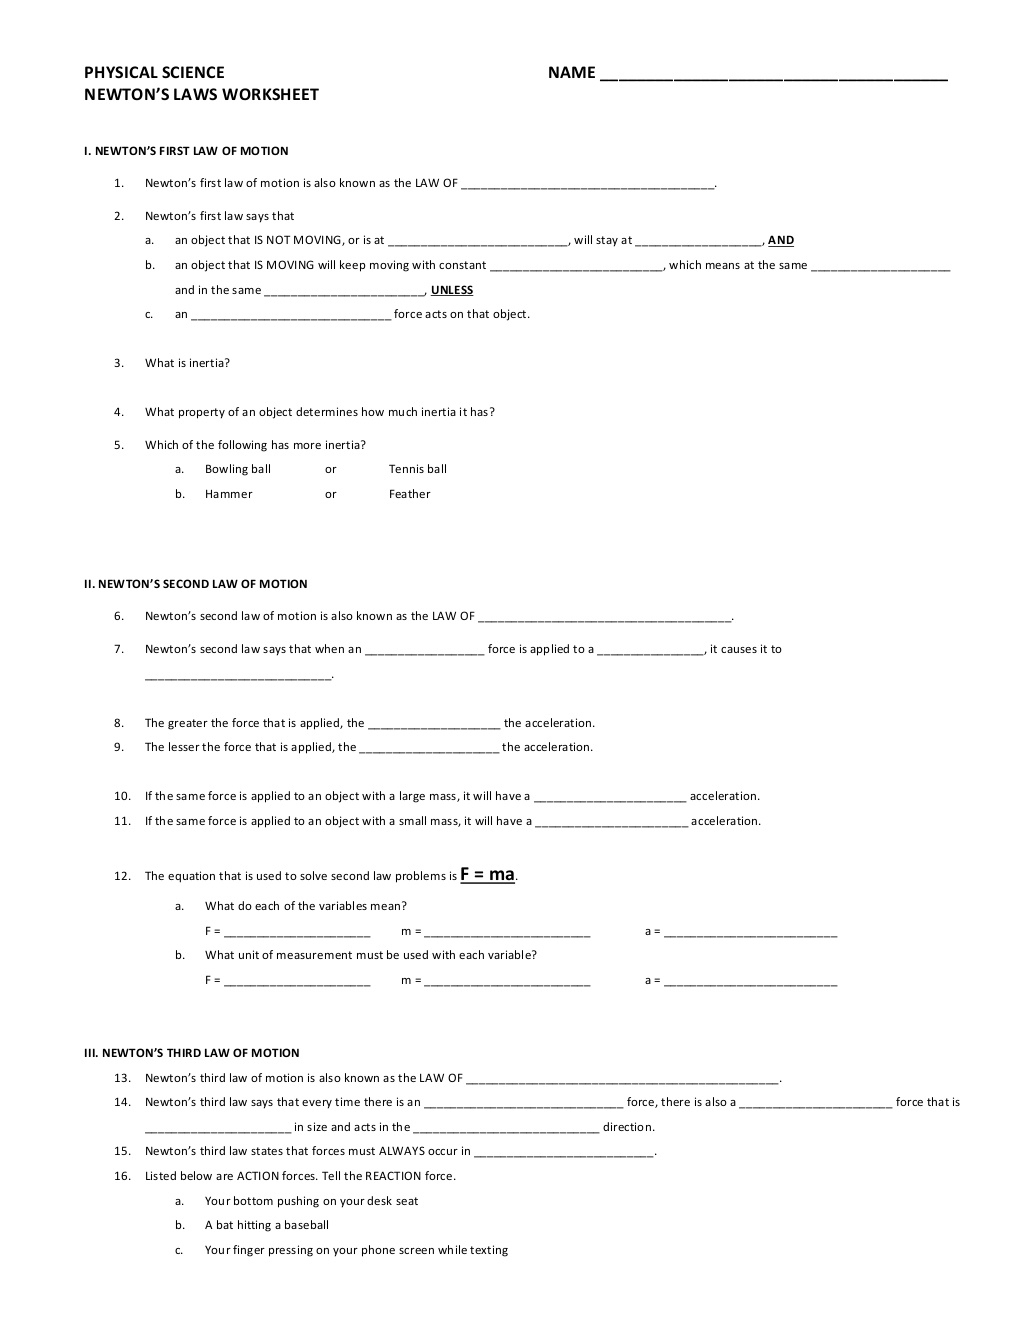 Holt Physical Science Worksheets. Science. Alistairtheoptimist Free - 9Th Grade Science Worksheets Free Printable